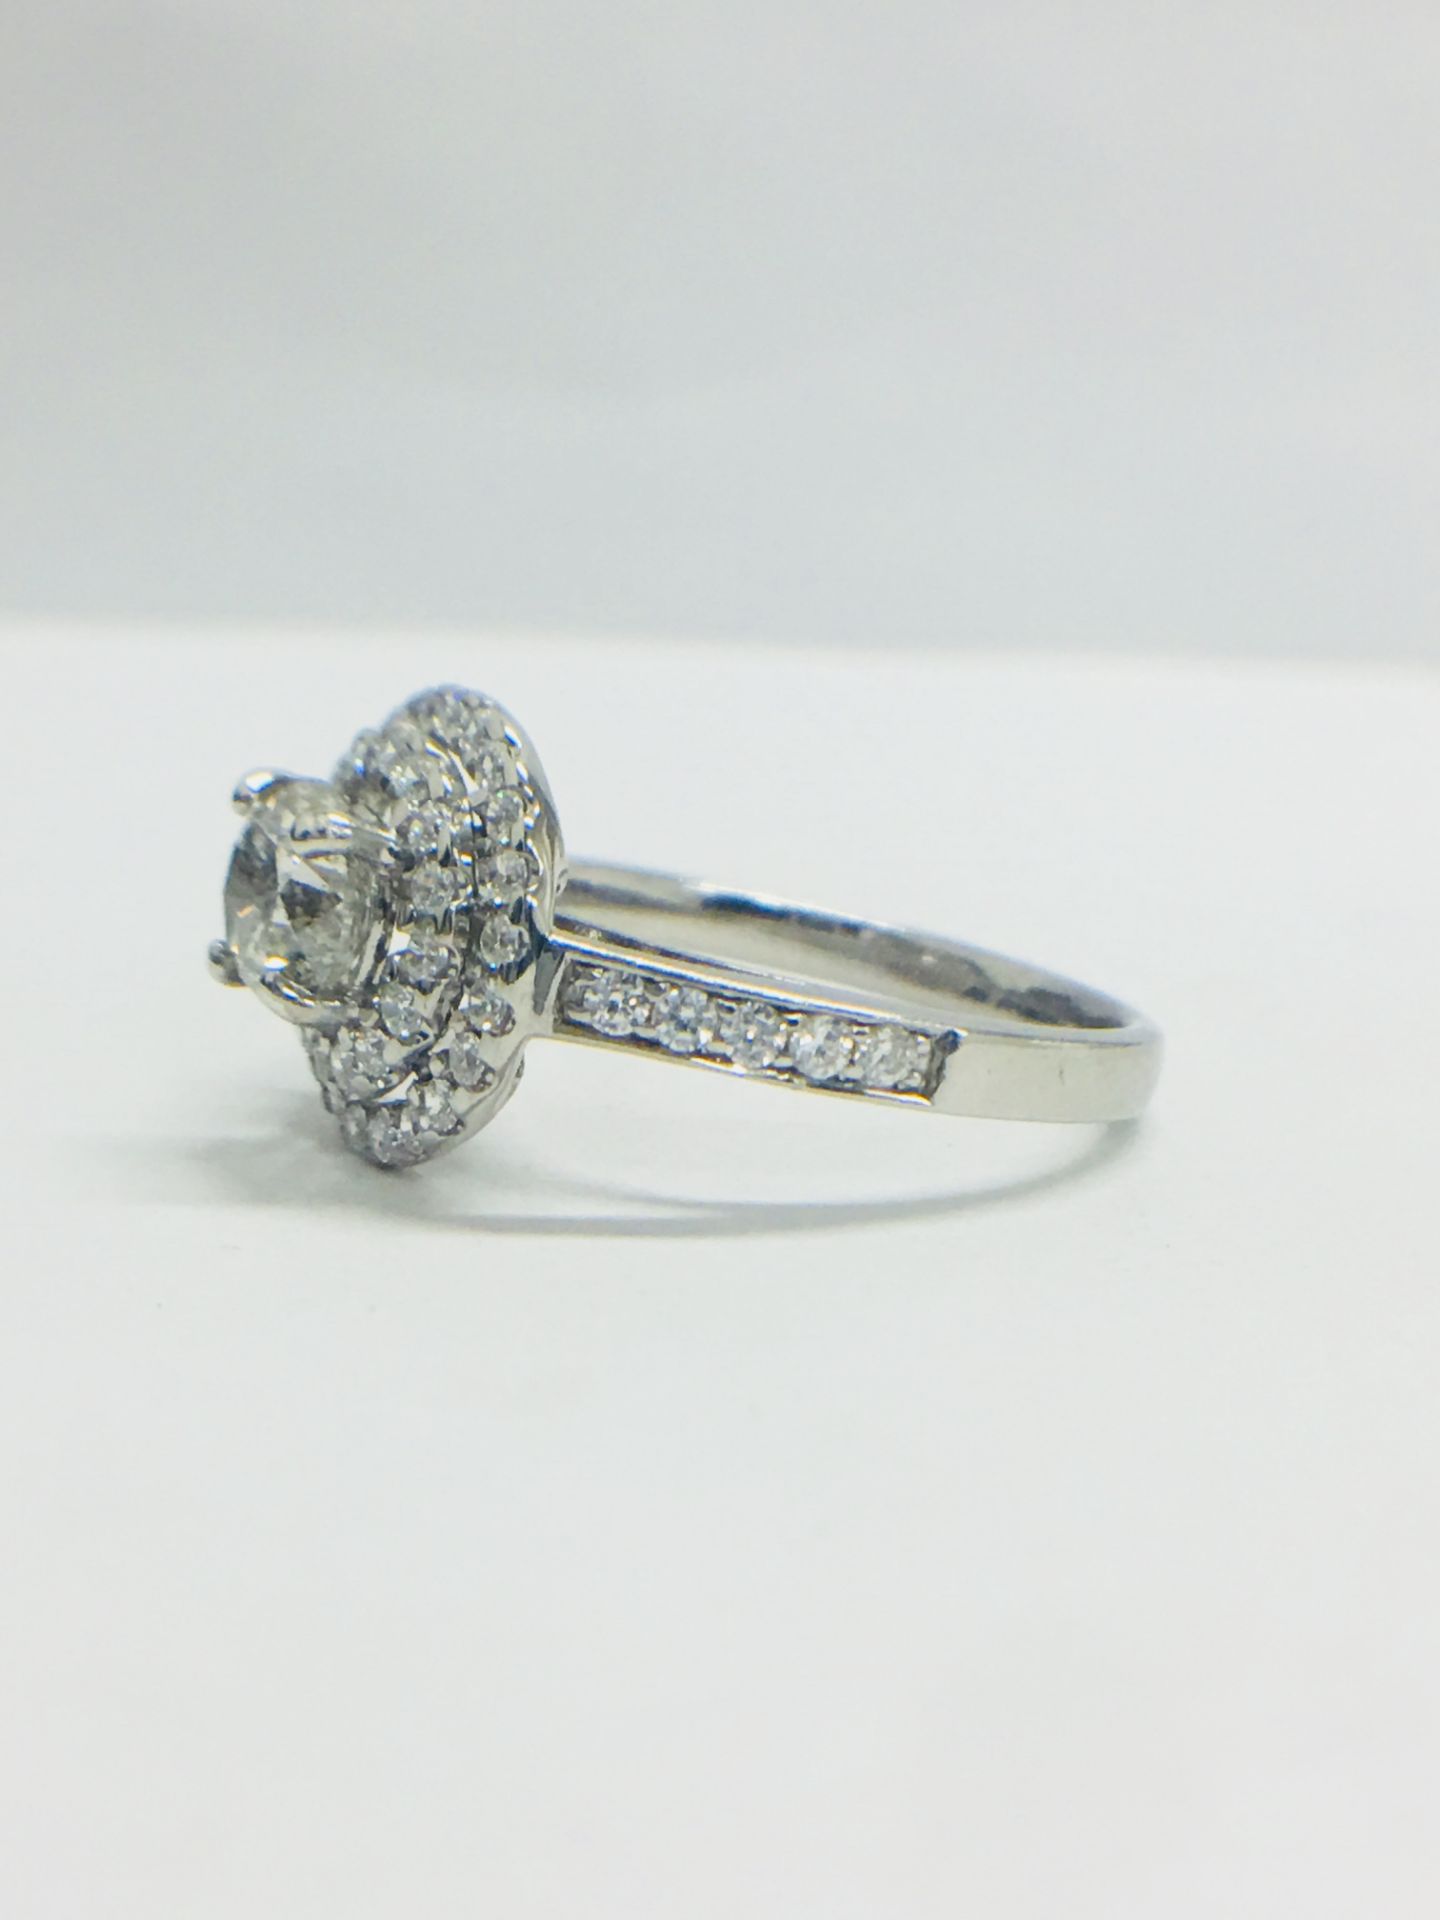 Platinum Double Halo Style Ring1.40Ct Total Diamond Weight, - Image 3 of 11